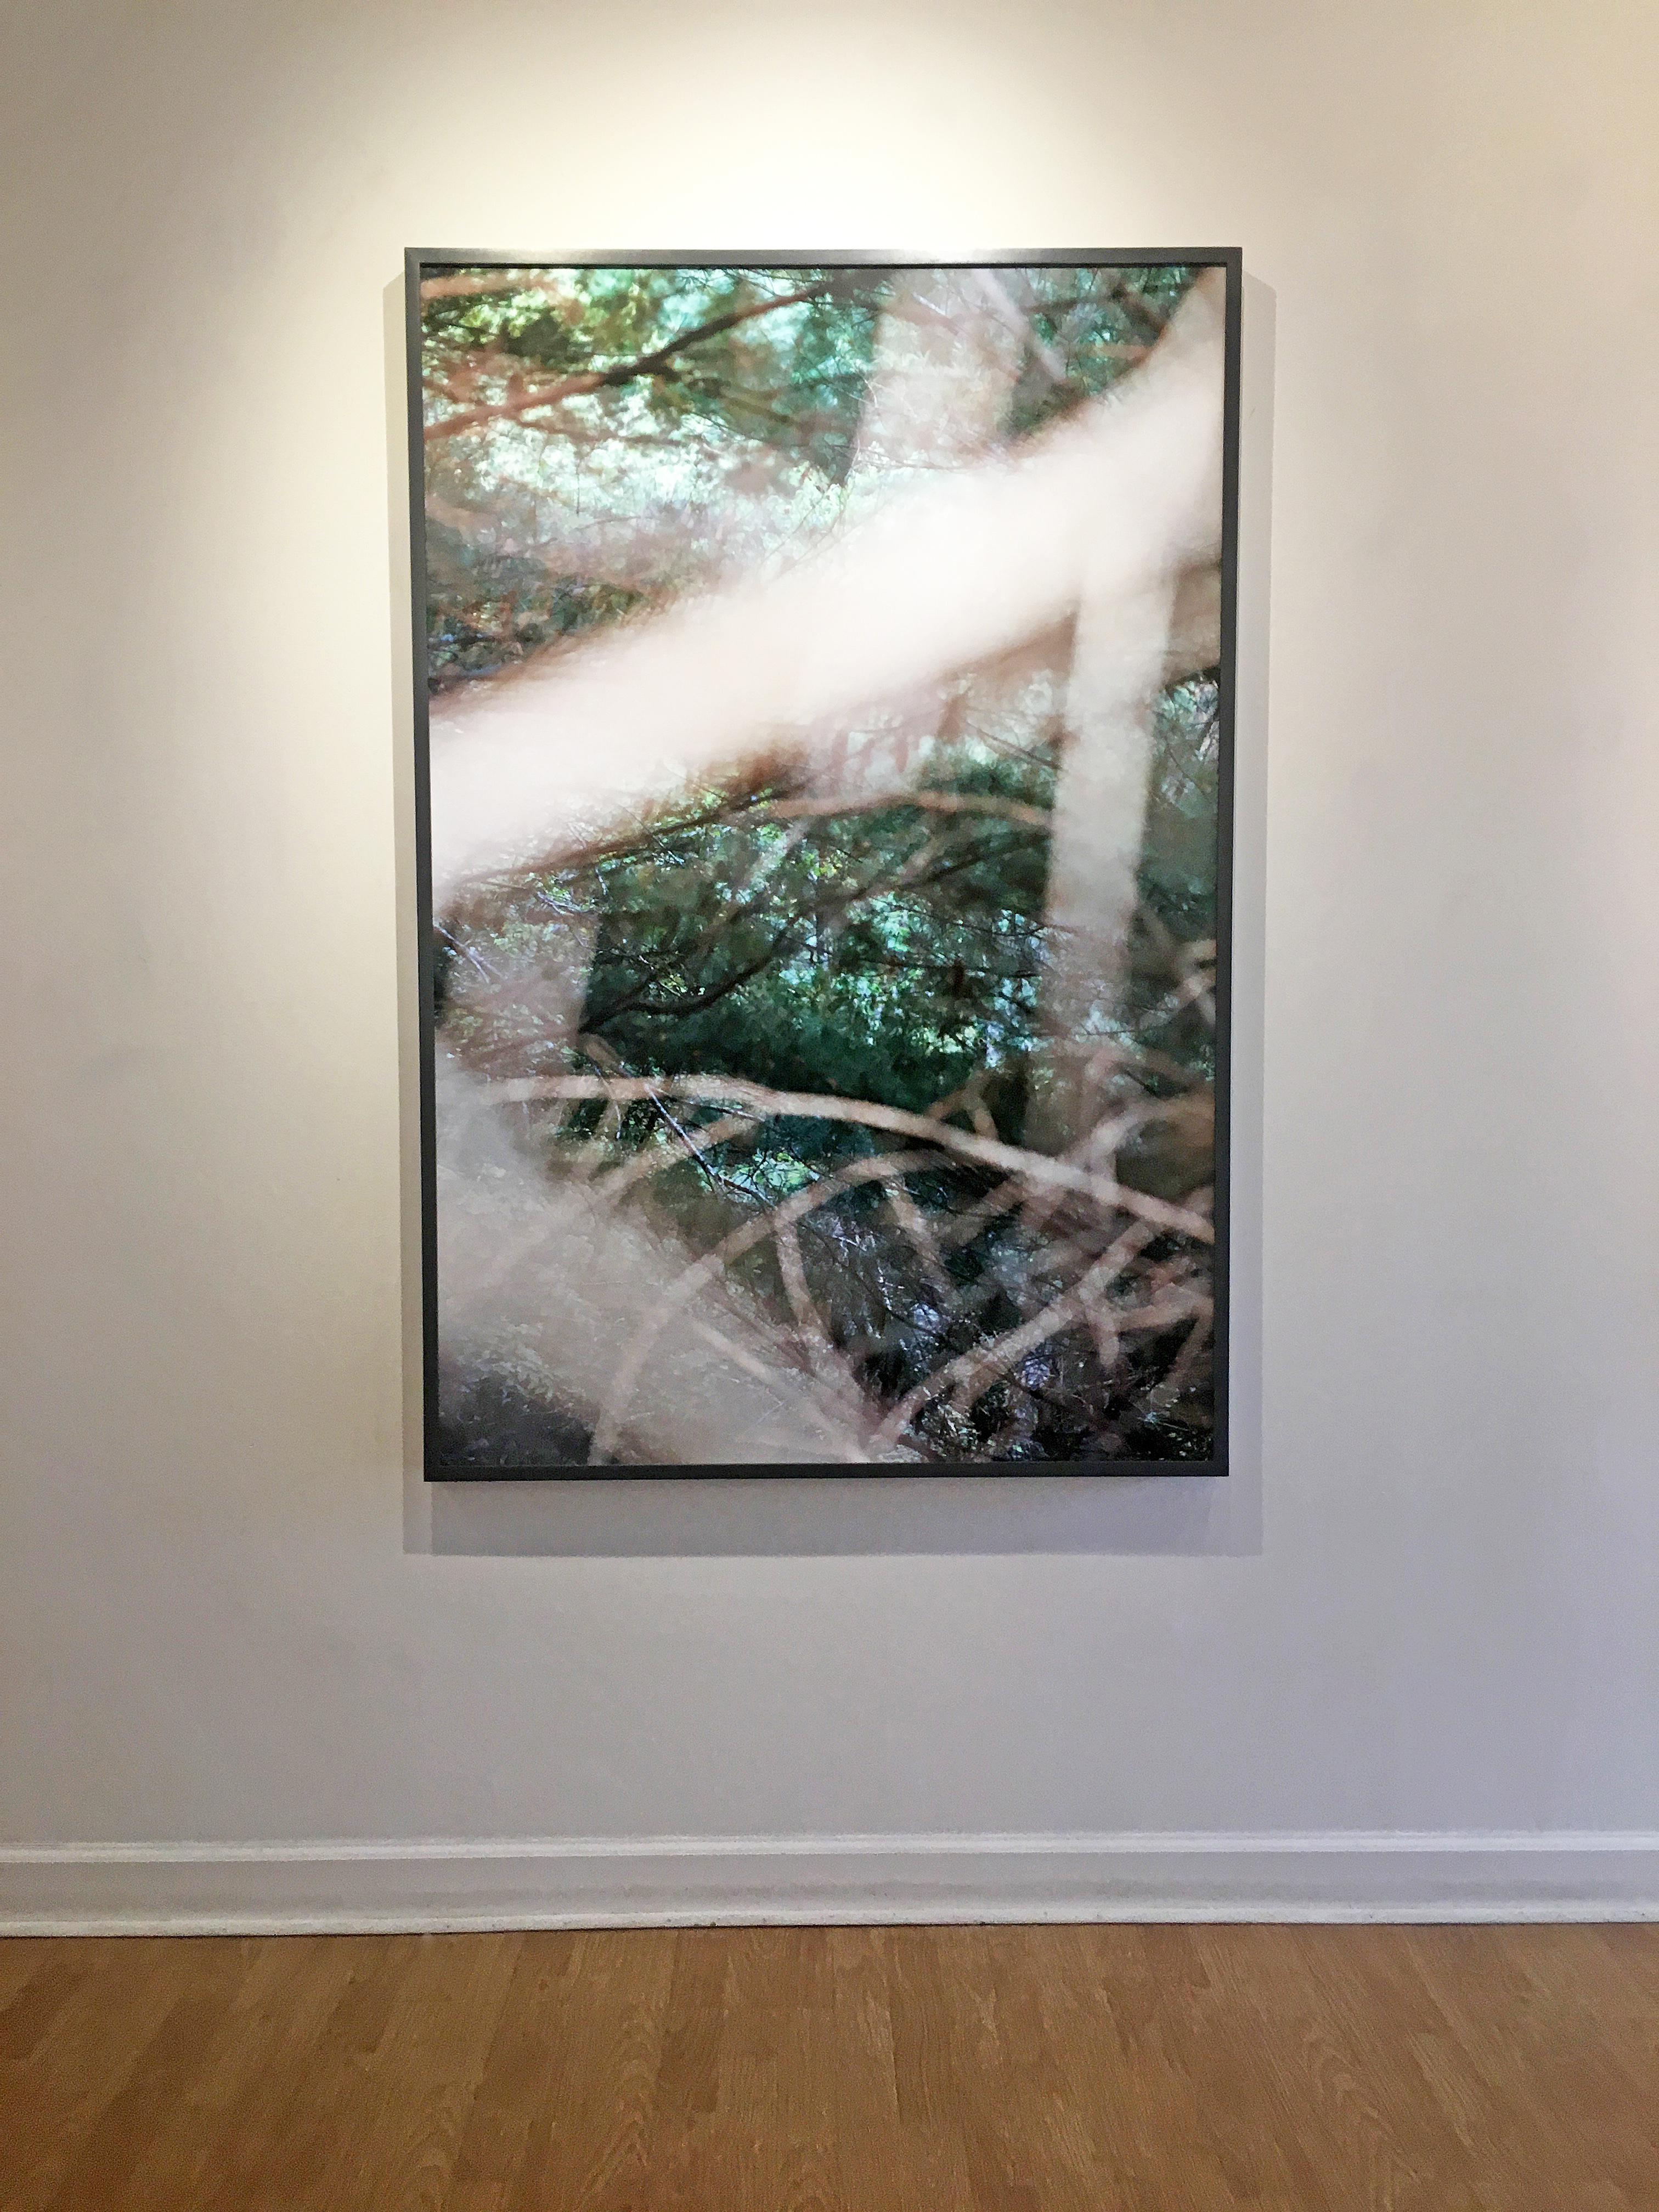 '8.31.15_4:45:54' 2017 by Susan Wides. Dye sublimation aluminum, Ed. of 5, 60 x 40 in. / Frame: 60.75 x 41 in. This color photo features a close-up view of a forest landscape with several tree branches and leaves in a dark grey frame. Using